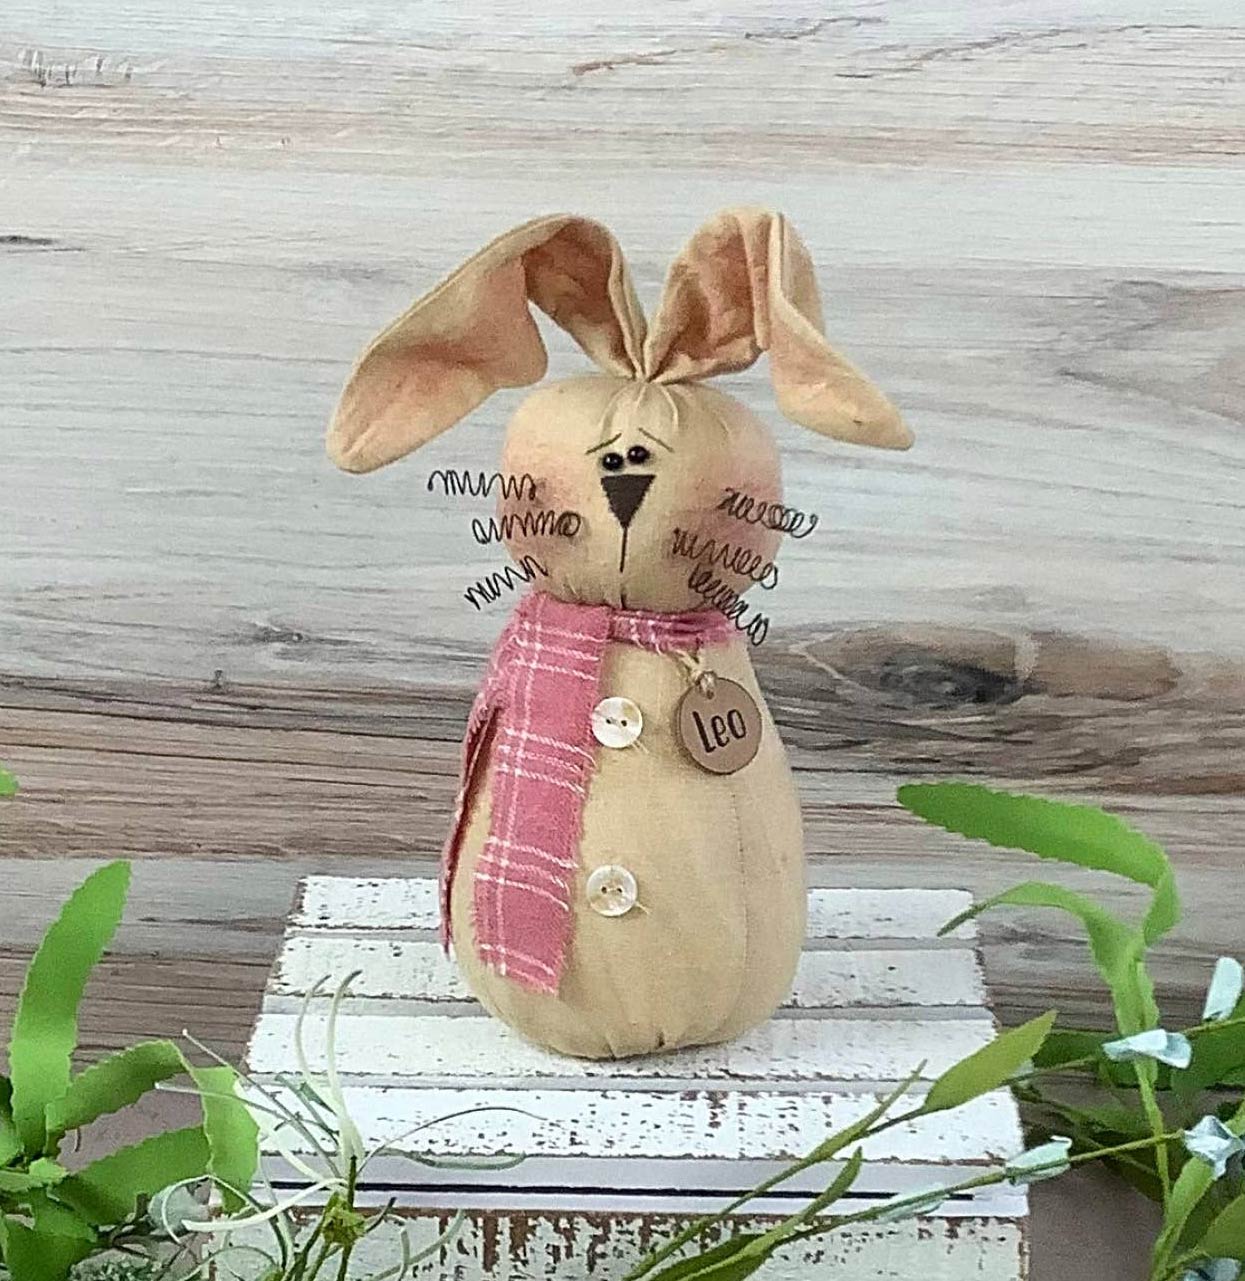 Leo the Hare Doll